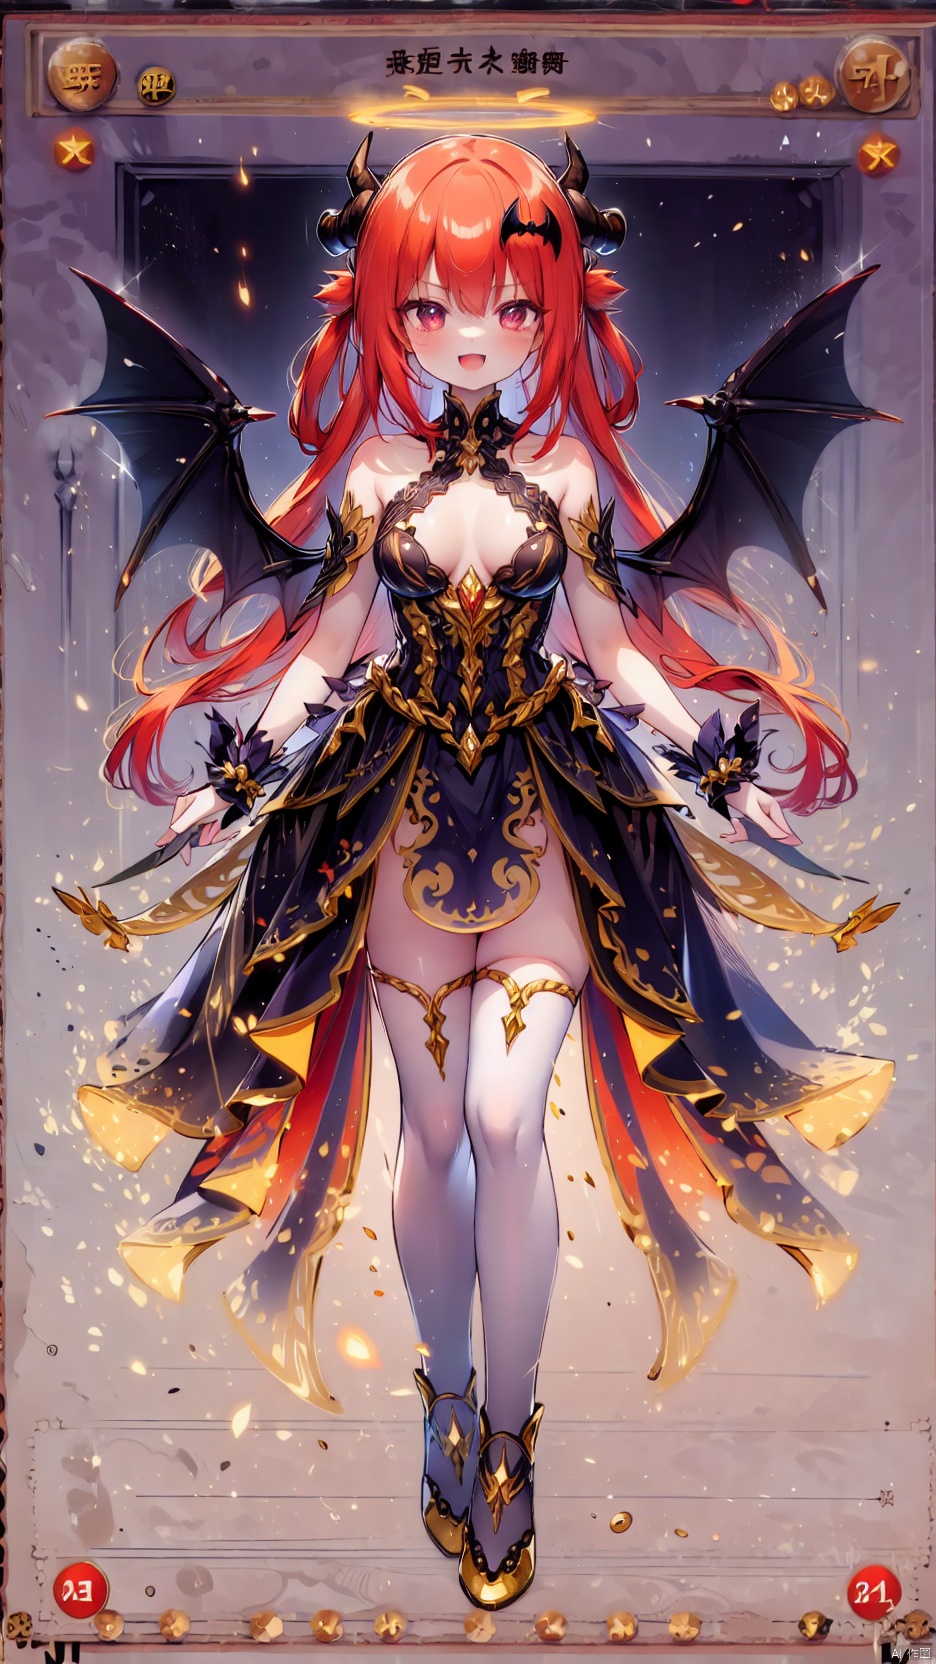  Card background,Satanichia Kurumizawa Mcdowell,angel girl,Little girl(1.6),aged down,1girl,solo,beautiful detailed girl,Glowing Halo on head,demon horns,demon wings,demon costume,fine fabric emphasis,ornate clothes,Glowing clothes,narrow waist,very small breasts,Glowing skin,Delicate cute face,red eyes,beautiful detailed eyes,raised eyebrow,((red hair)),((long hair,bat wings hair ornament)),Glowing hair,Extremely delicate hair,Thin leg,white thighhighs,((beautiful detailed hands)),Slender fingers,pink nails,(standing,victory pose),mischievous smile(expression),open mouth,tongue out,fangs out,Glowing feather(ornament),church,Marble Pillar,hyper realistic,magic,8k,incredible quality,best quality,masterpiece,highly detailed,extremely detailed CG,cinematic lighting,backlighting,full body,high definition,detail enhancement,(perfect hands, perfect anatomy),detail enhancement, gabriel tenma white, satanichia kurumizawa mcdowell